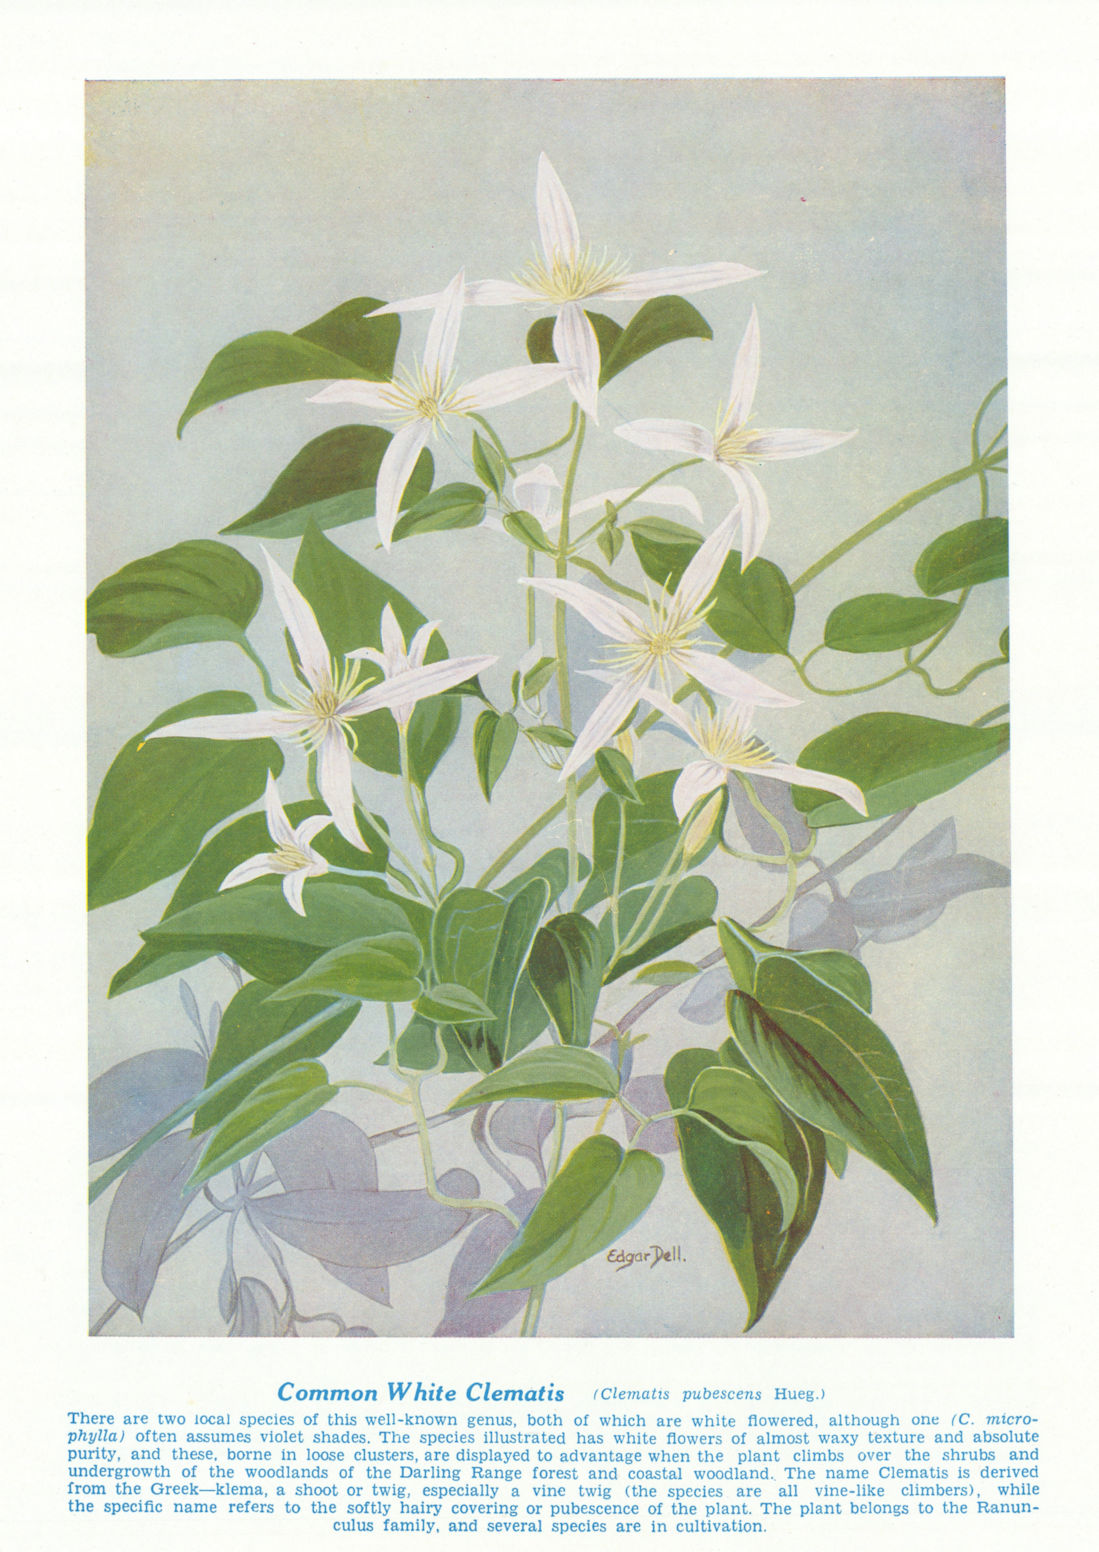 Common White Clematis (Clematis pubescens). West Australian Wild Flowers 1950